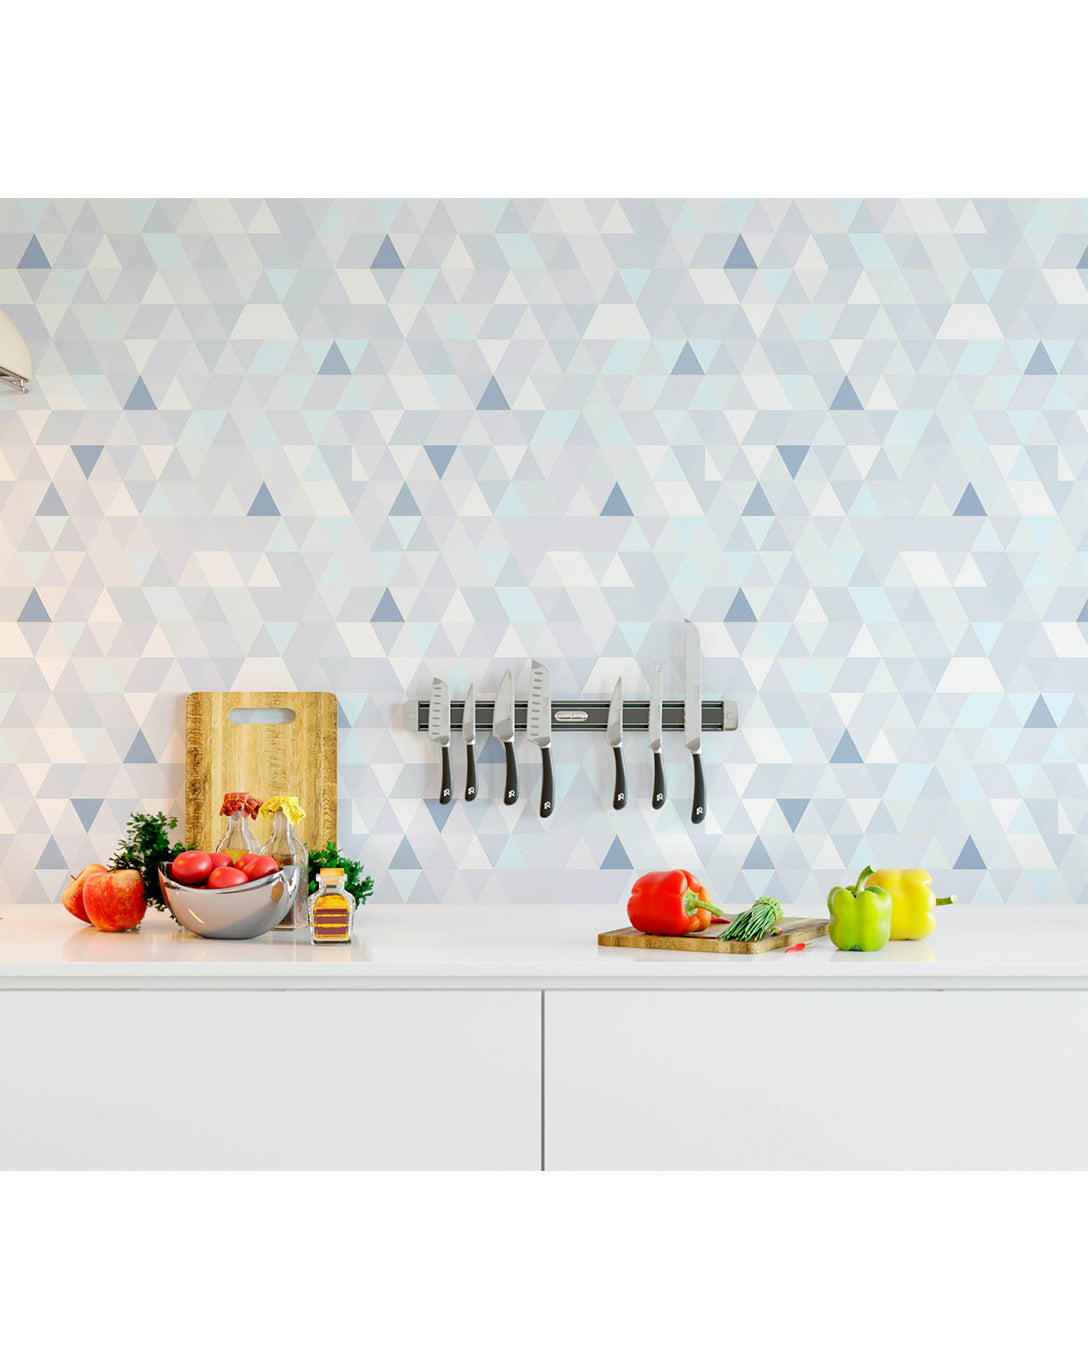 Geometric peel and stick removable temporary wallpaper vinyl with blue and white triangles self adhesive wall mural CC040